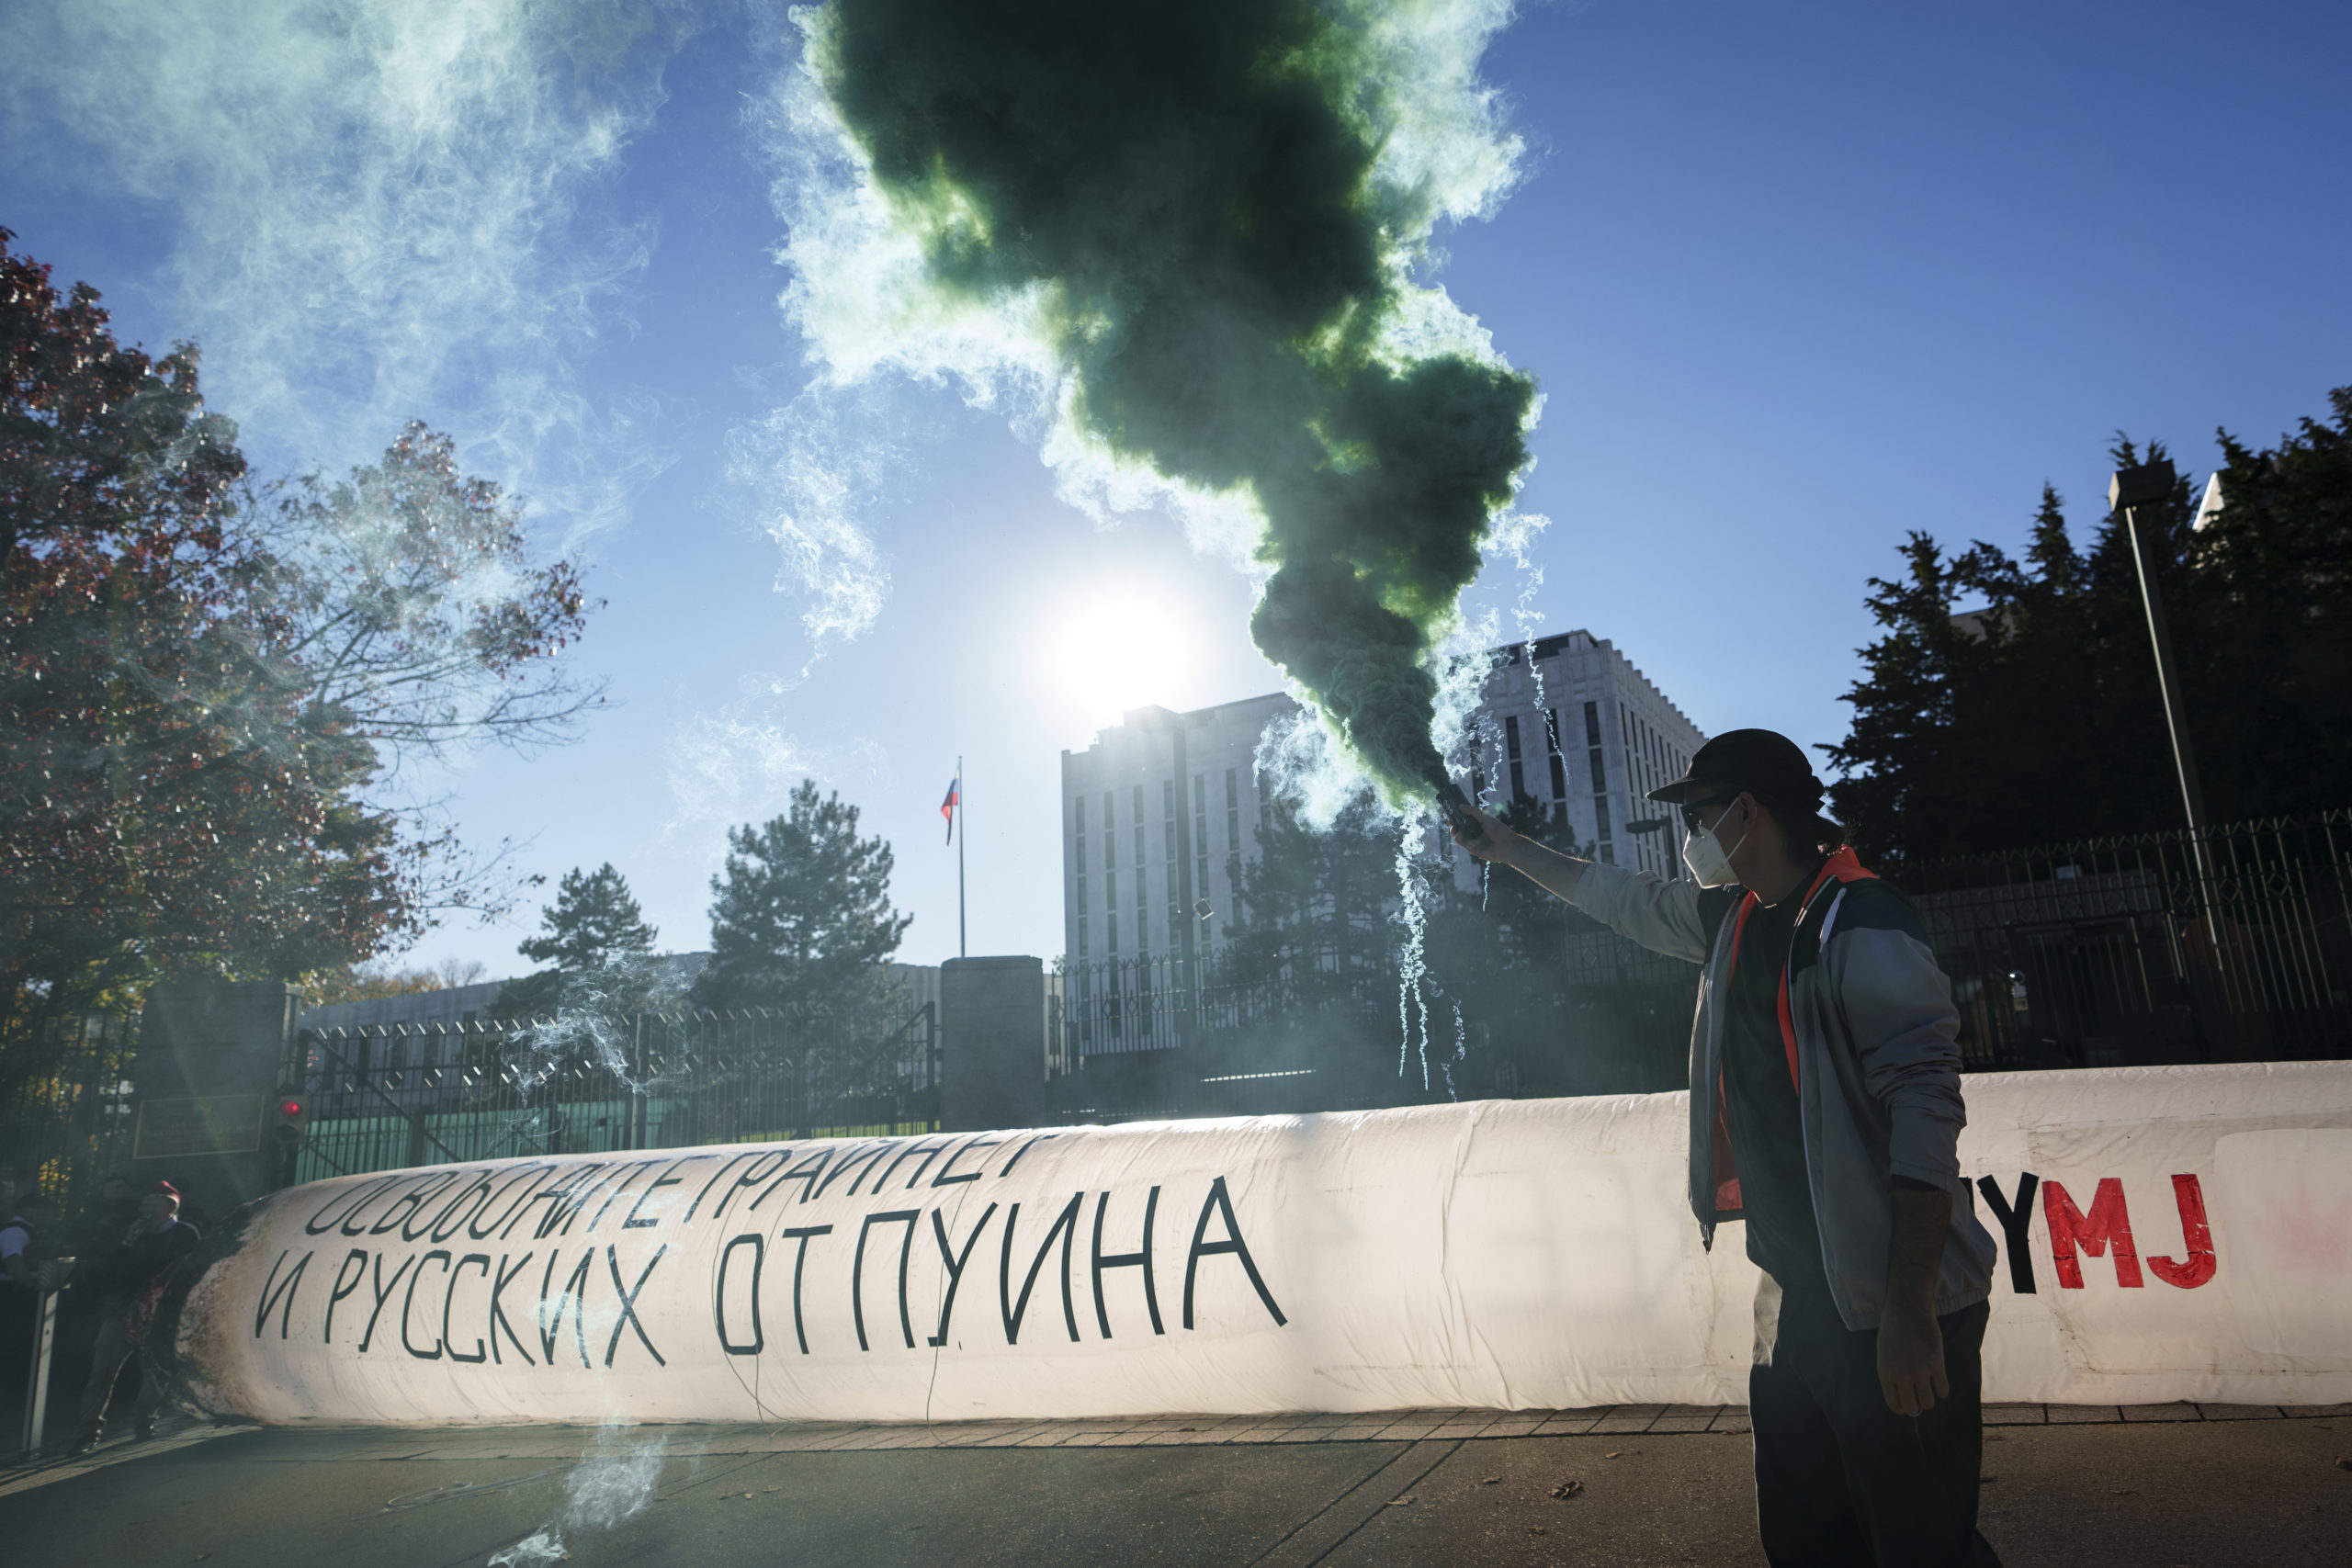 WASHINGTON, DC - OCTOBER 27: Cannabis advocates deploy green smoke and a fake inflatable joint outside the Russian Embassy to demand the release of American basketball star Brittney Griner, who has been imprisoned in Russia since February for cannabis possession, October 27, 2022 in Washington, DC. Earlier this week, a Russian appeals court upheld a nine-year prison sentence imposed on Griner. According to the Biden administration, Russia and the United States have been in frequent contact about a potential prisoner exchange involving Griner and others. 